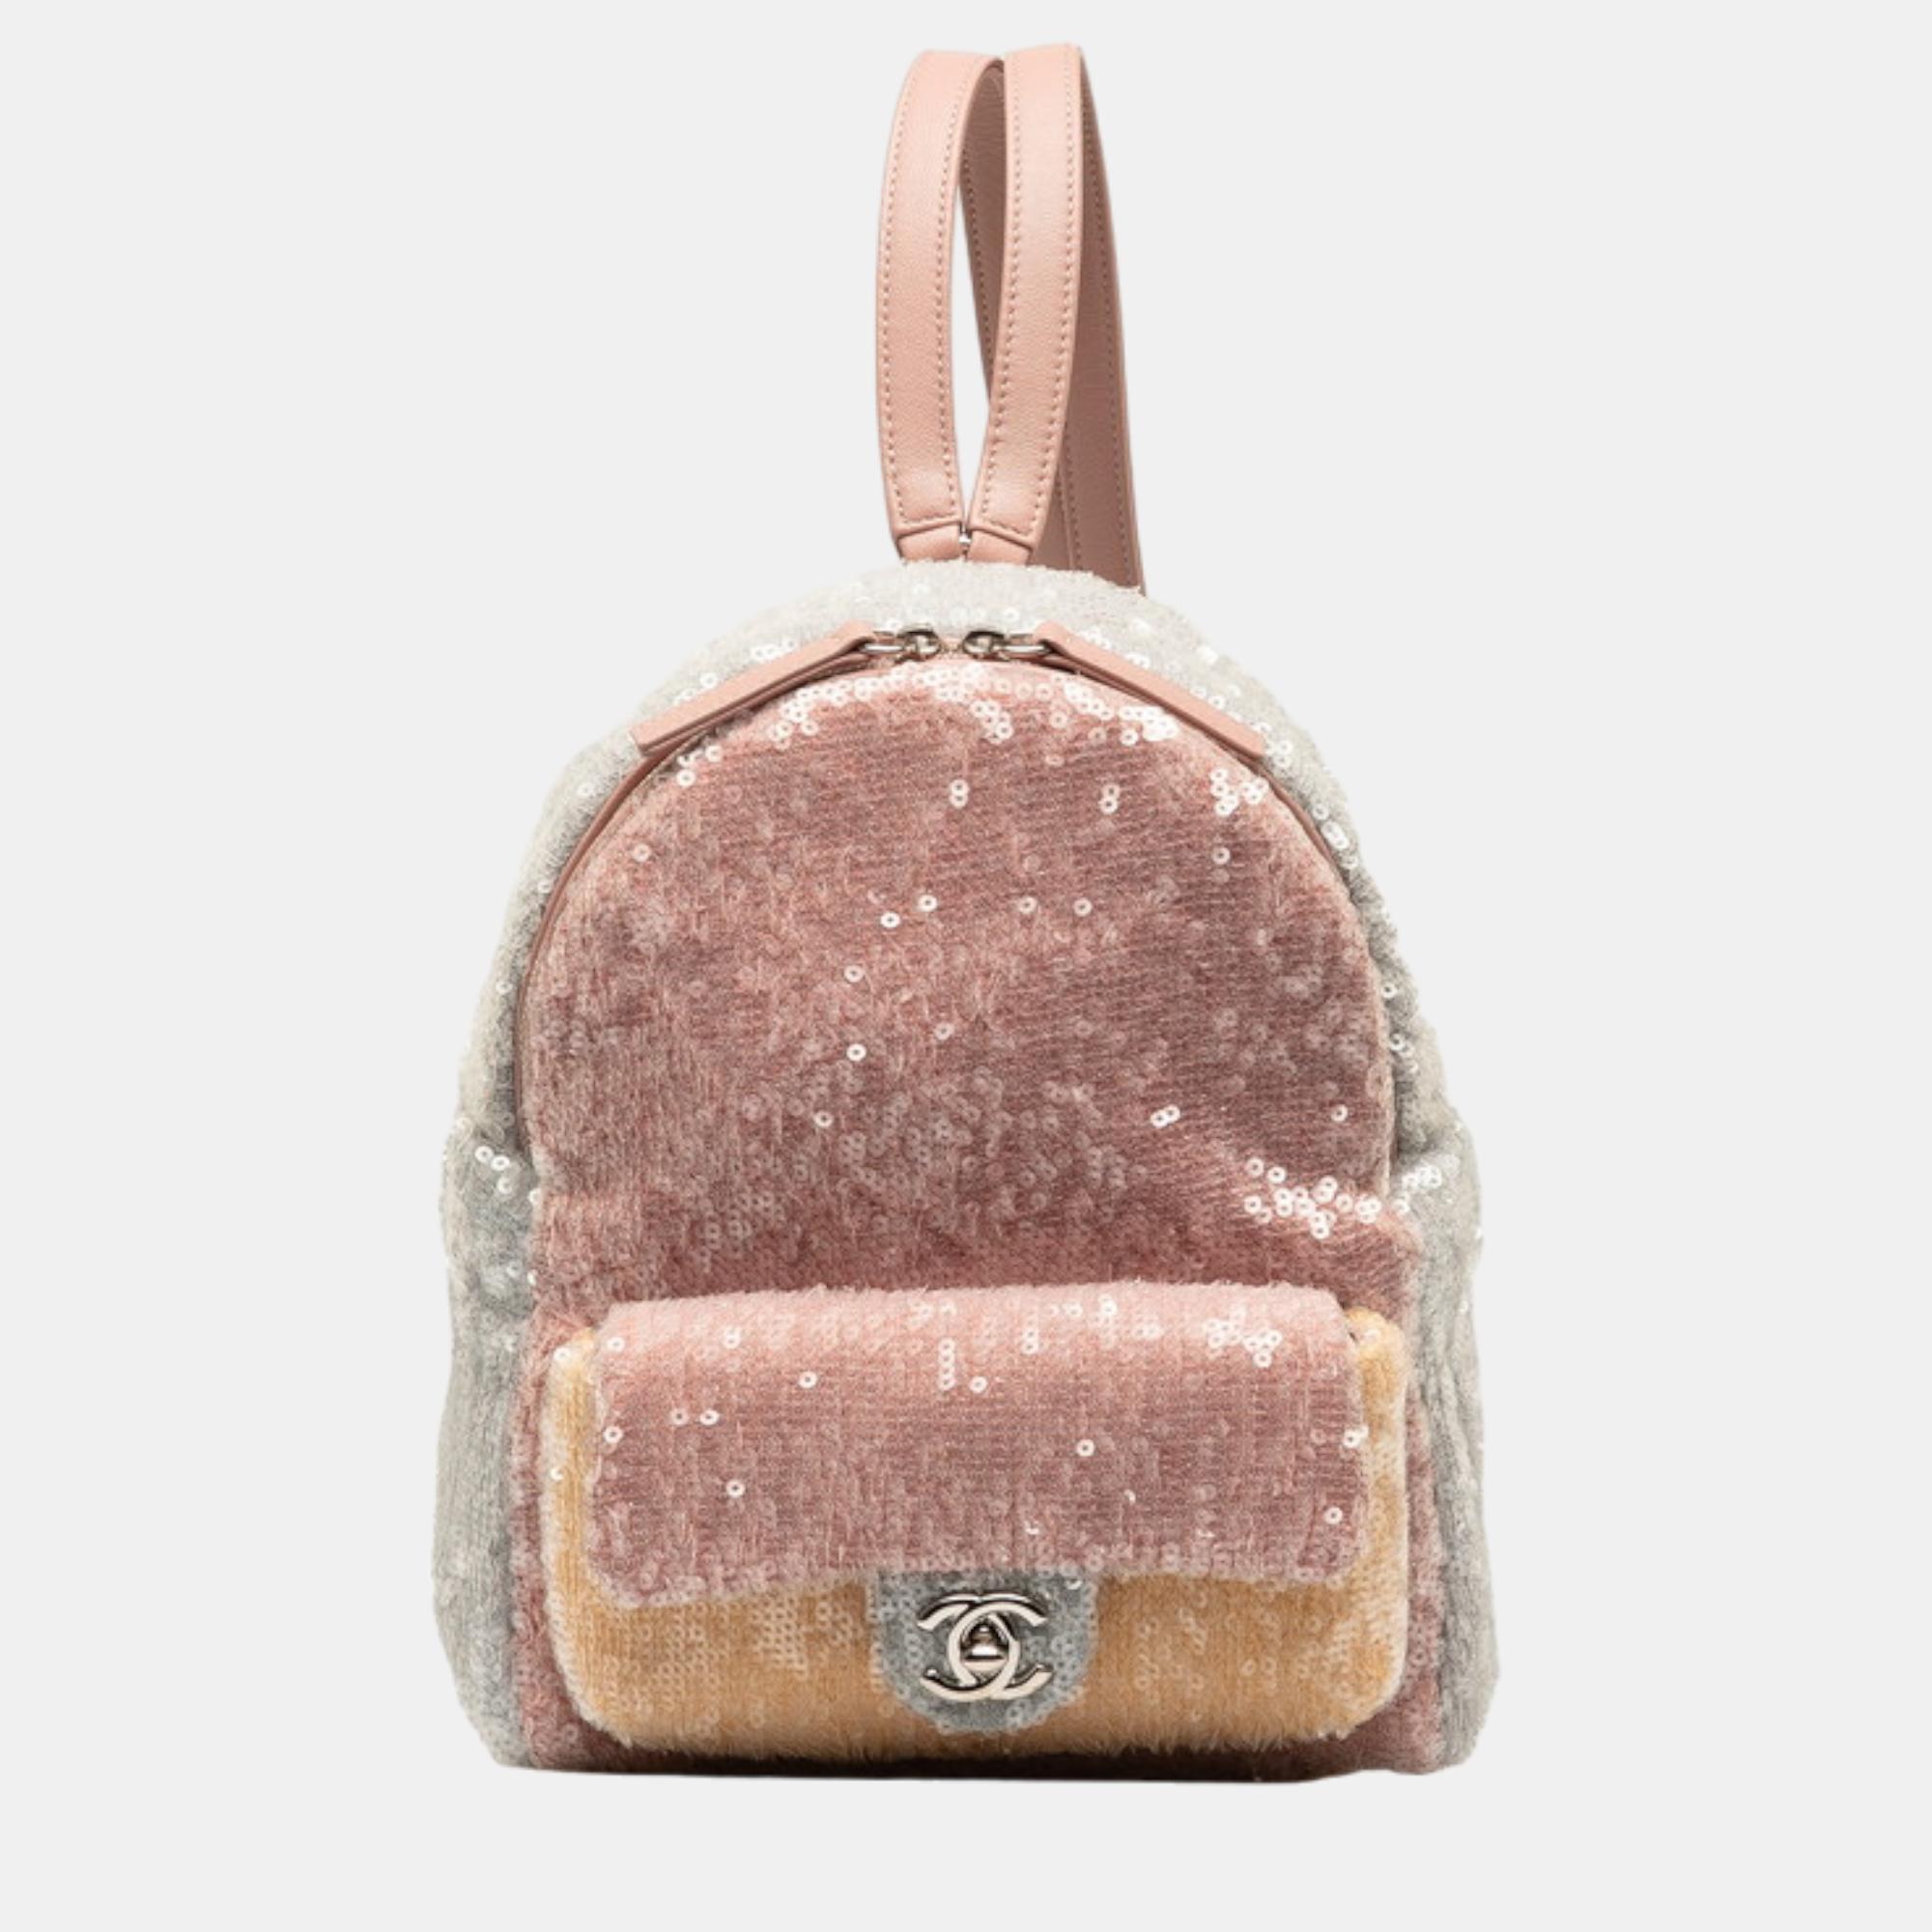 Chanel pink leather waterfall sequin mini backpack